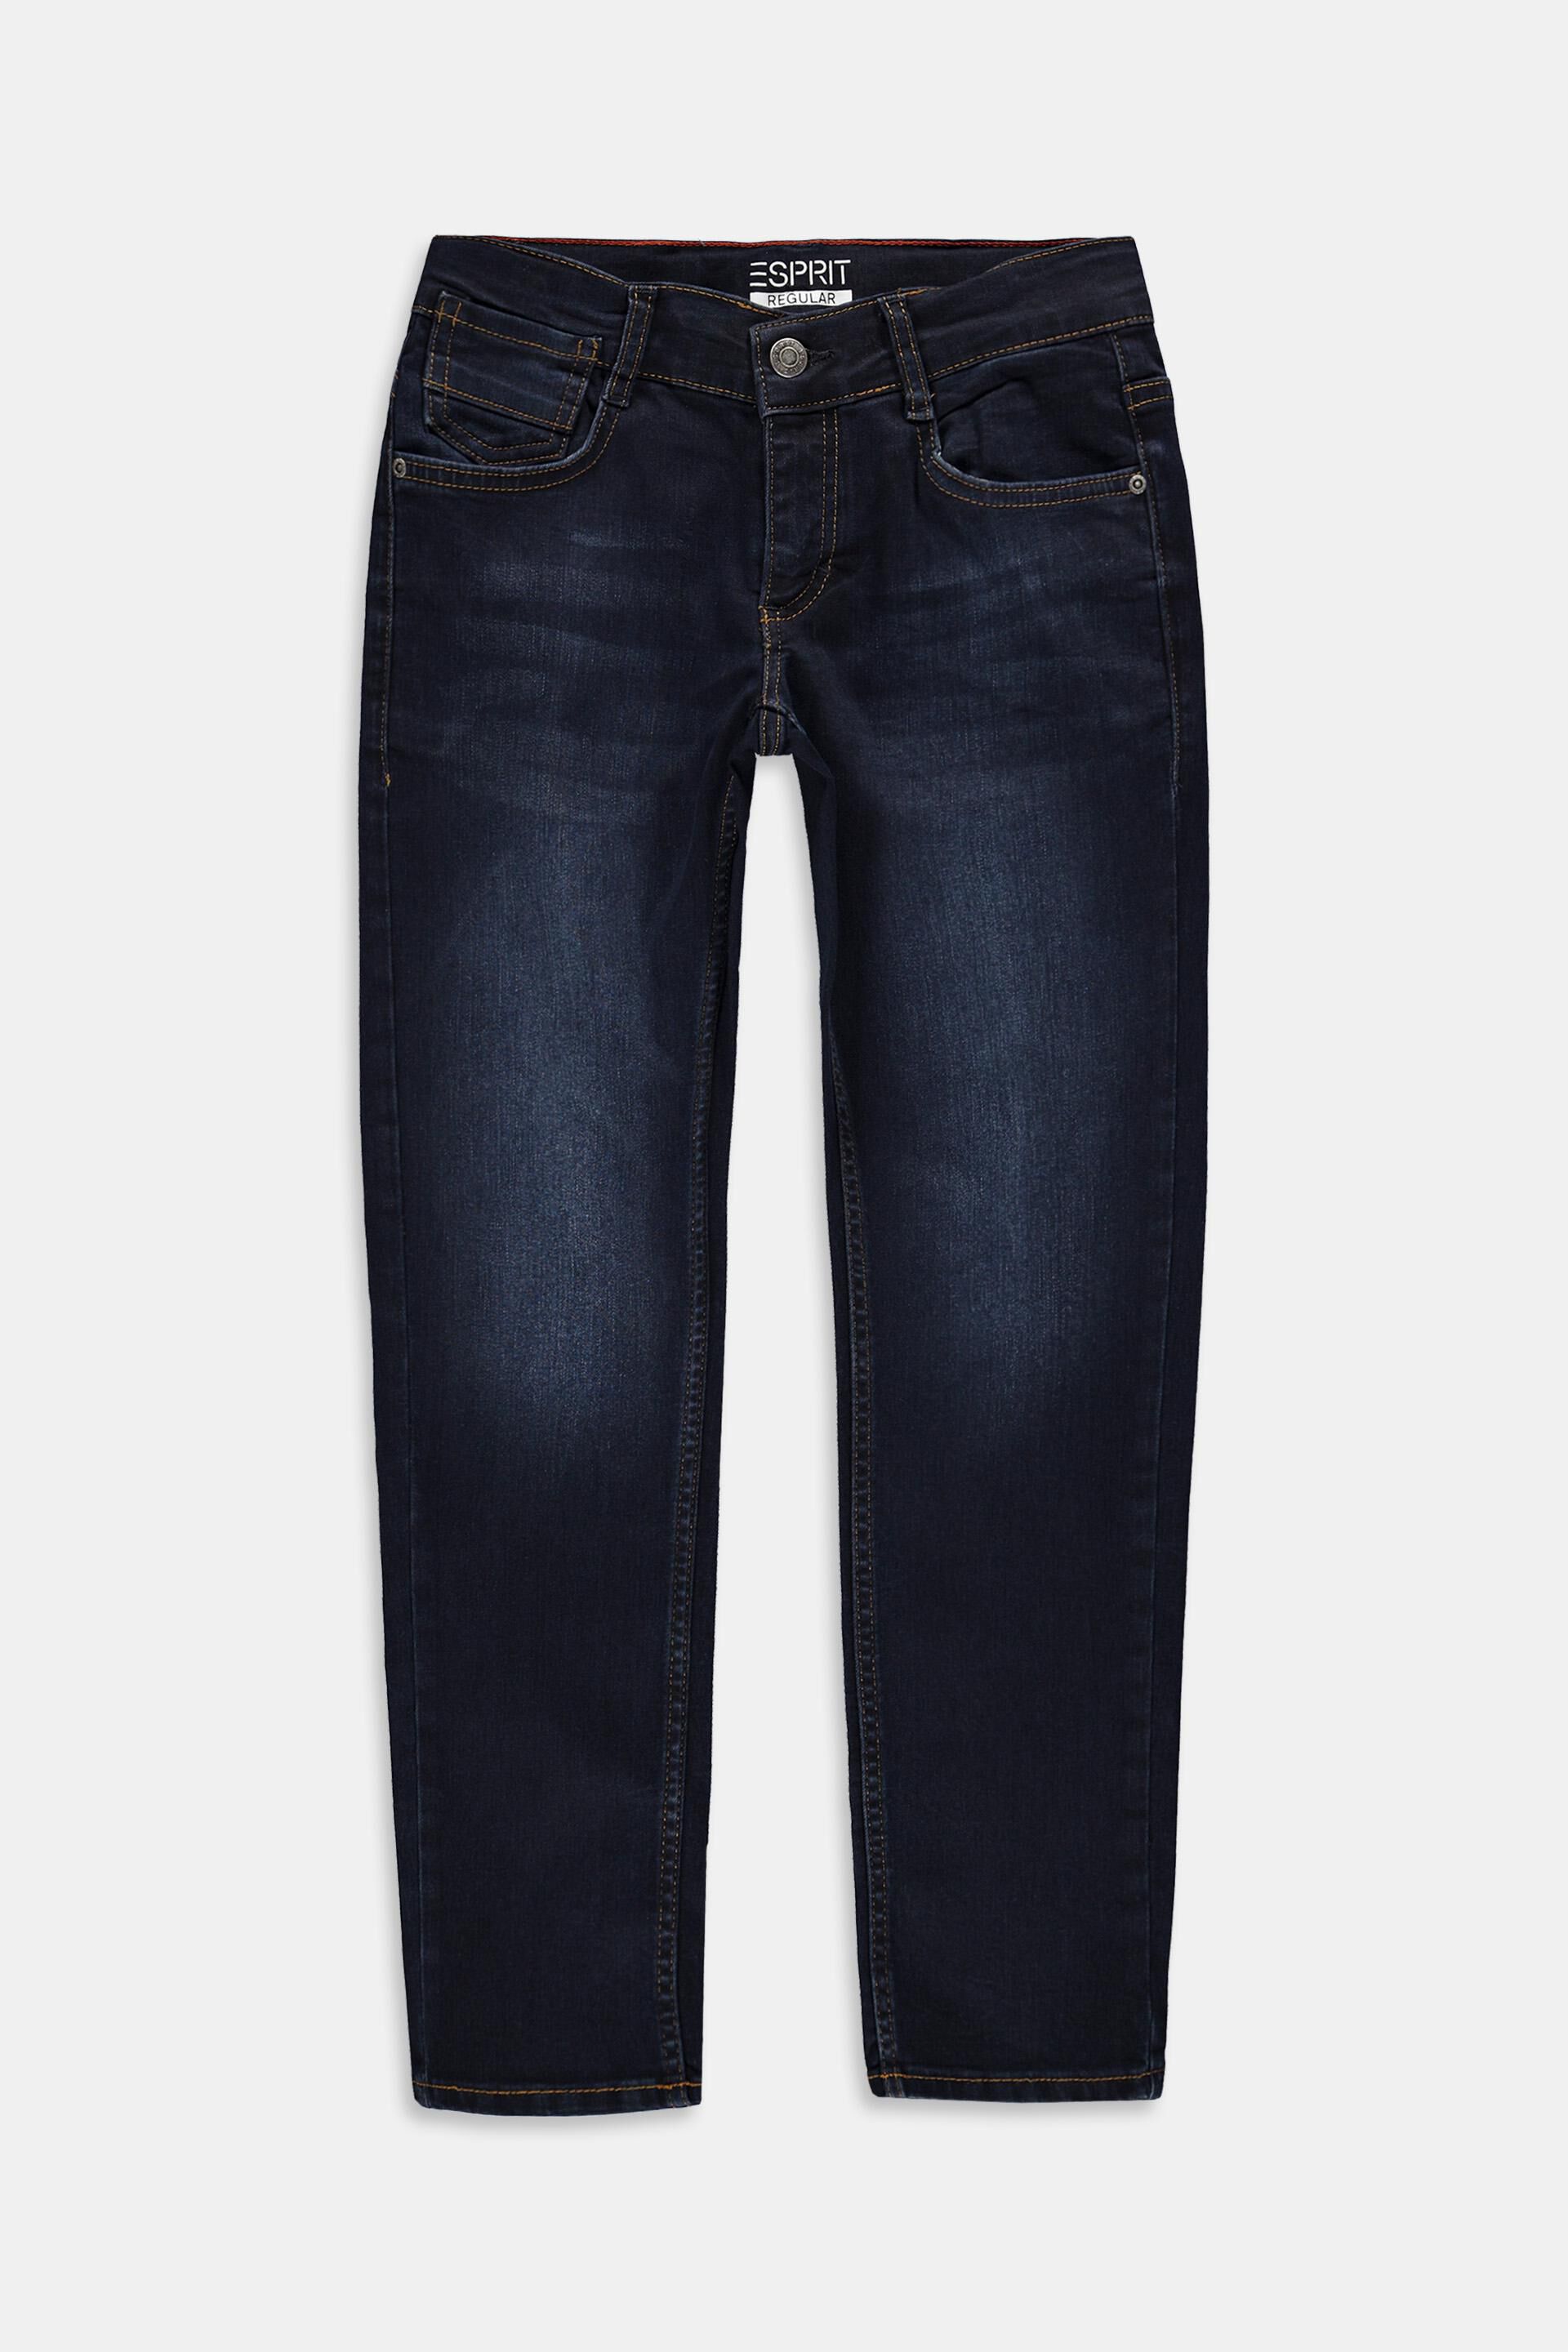 Esprit Teppich Jeans with adjustable waistband